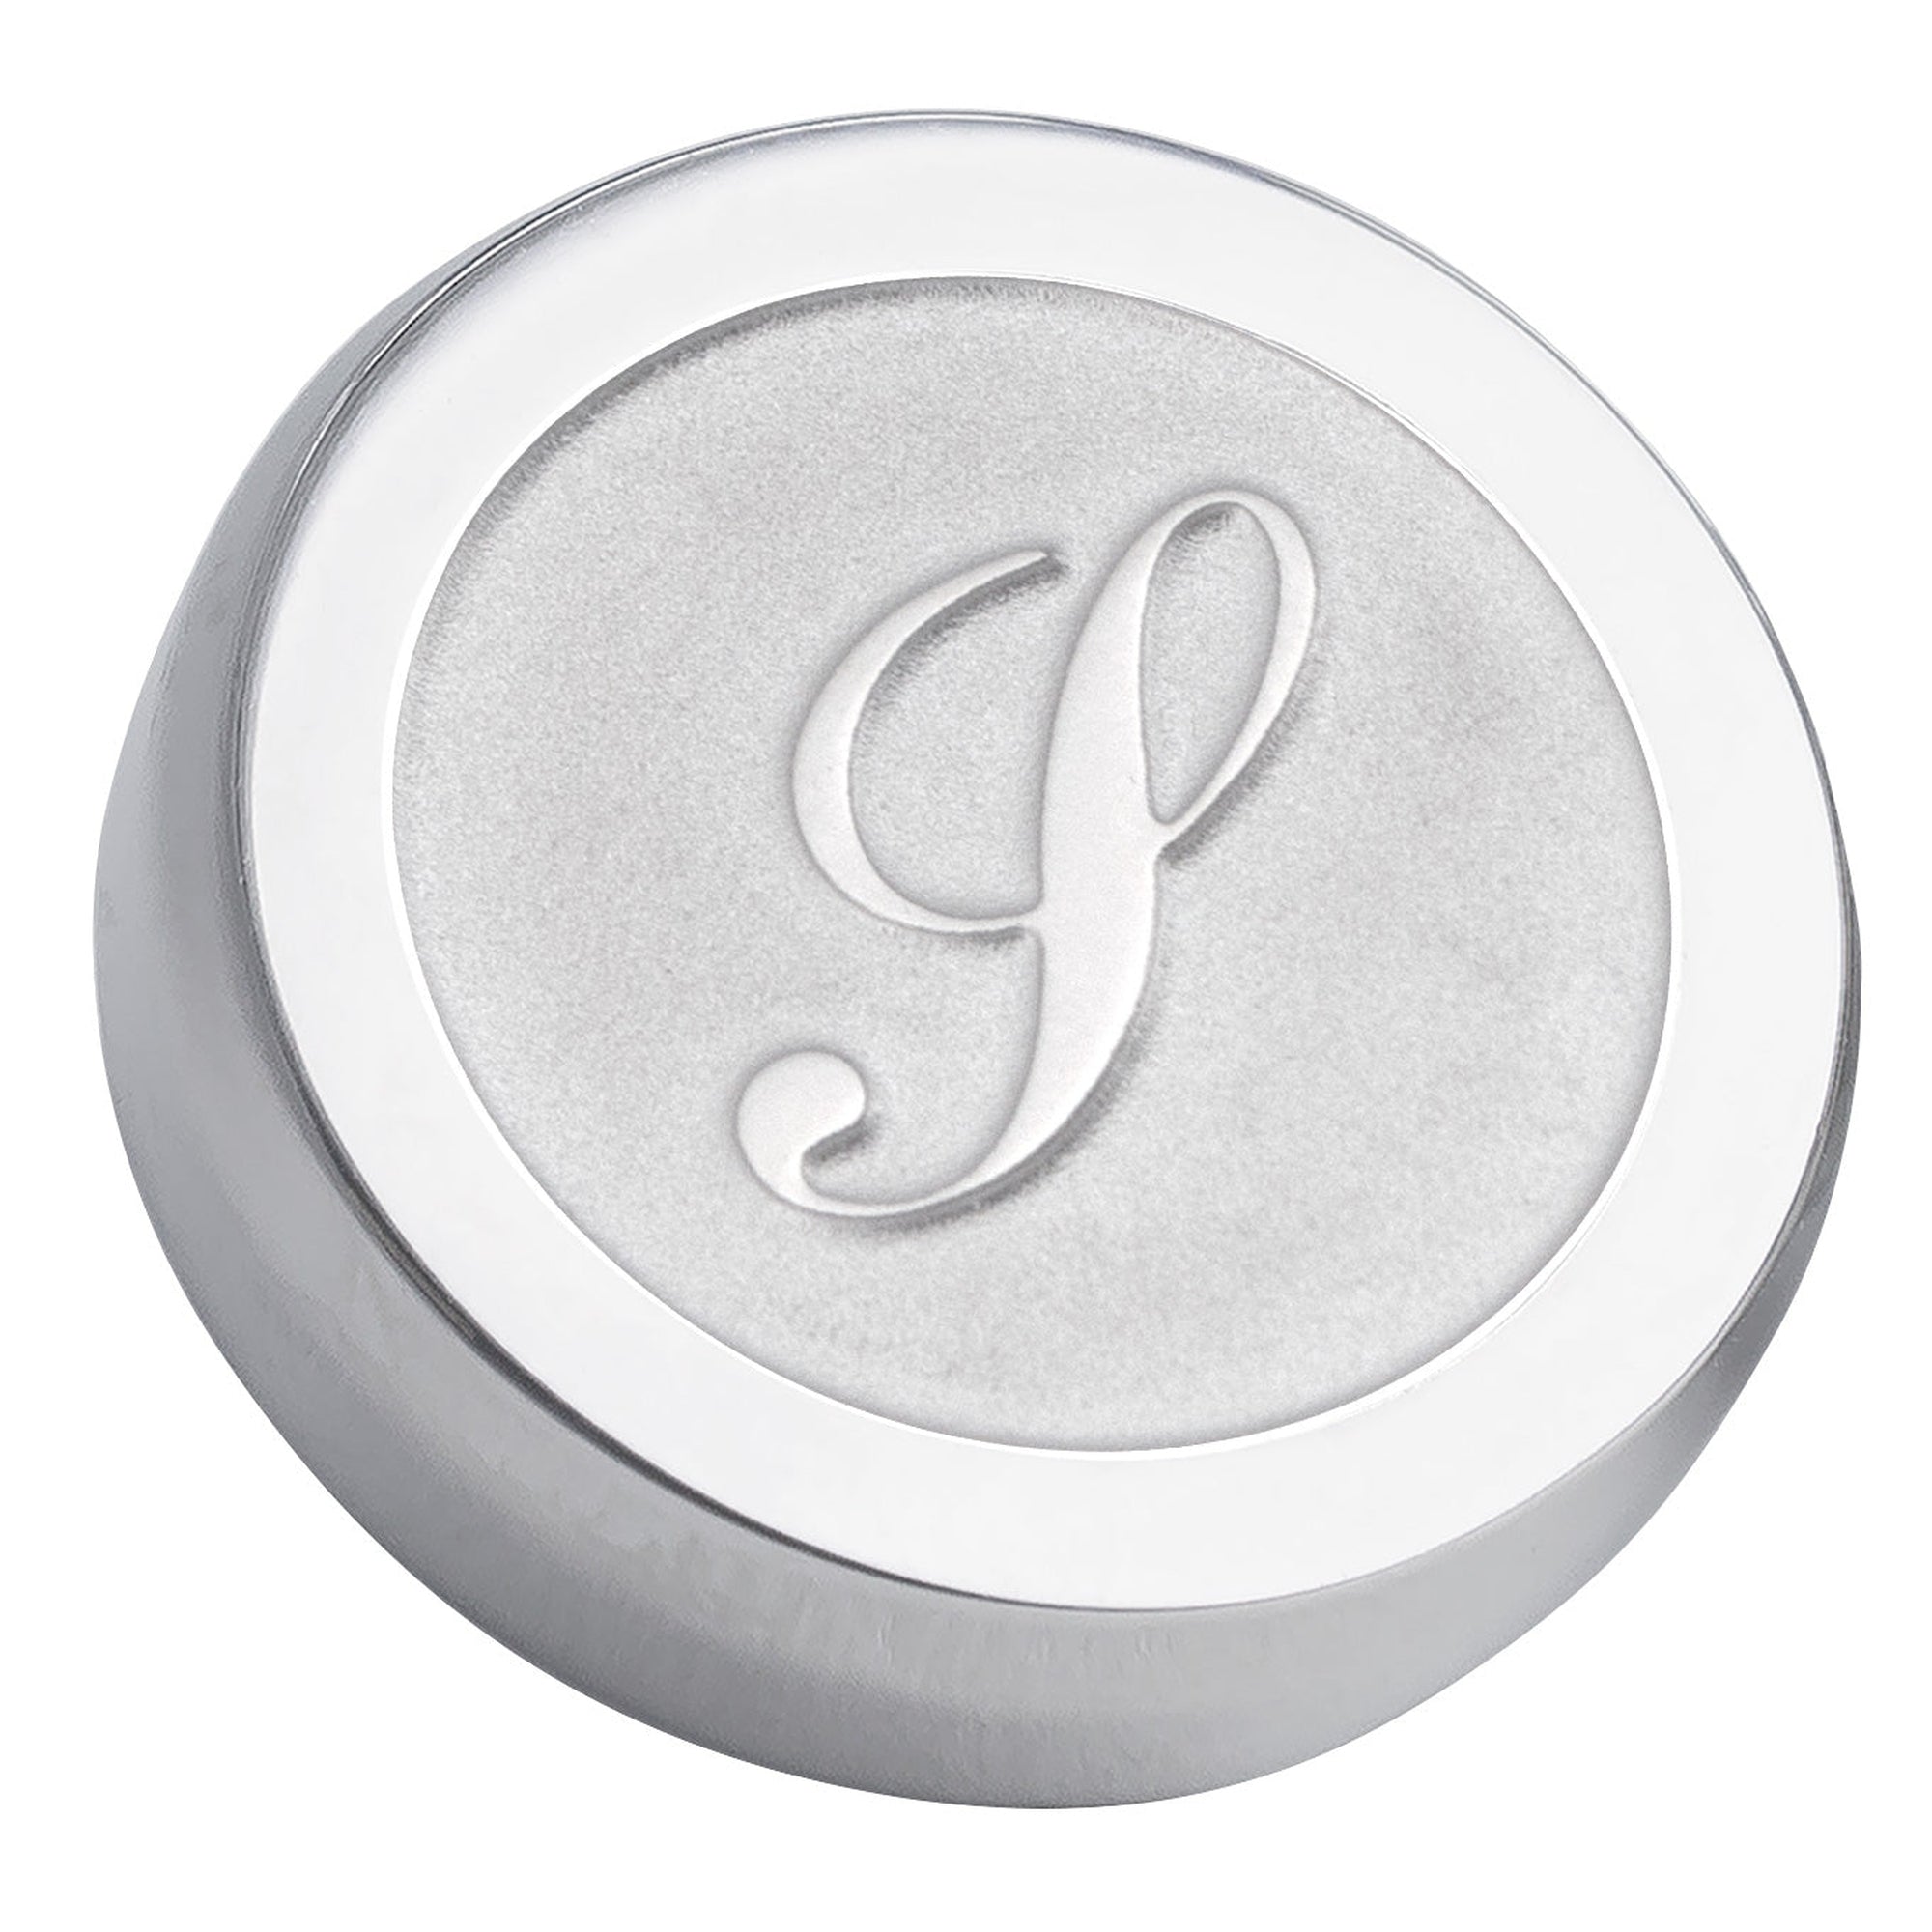 Lapel with Clip-on Monogram Etched Silver Button Covers-Cufflinks.com.sg